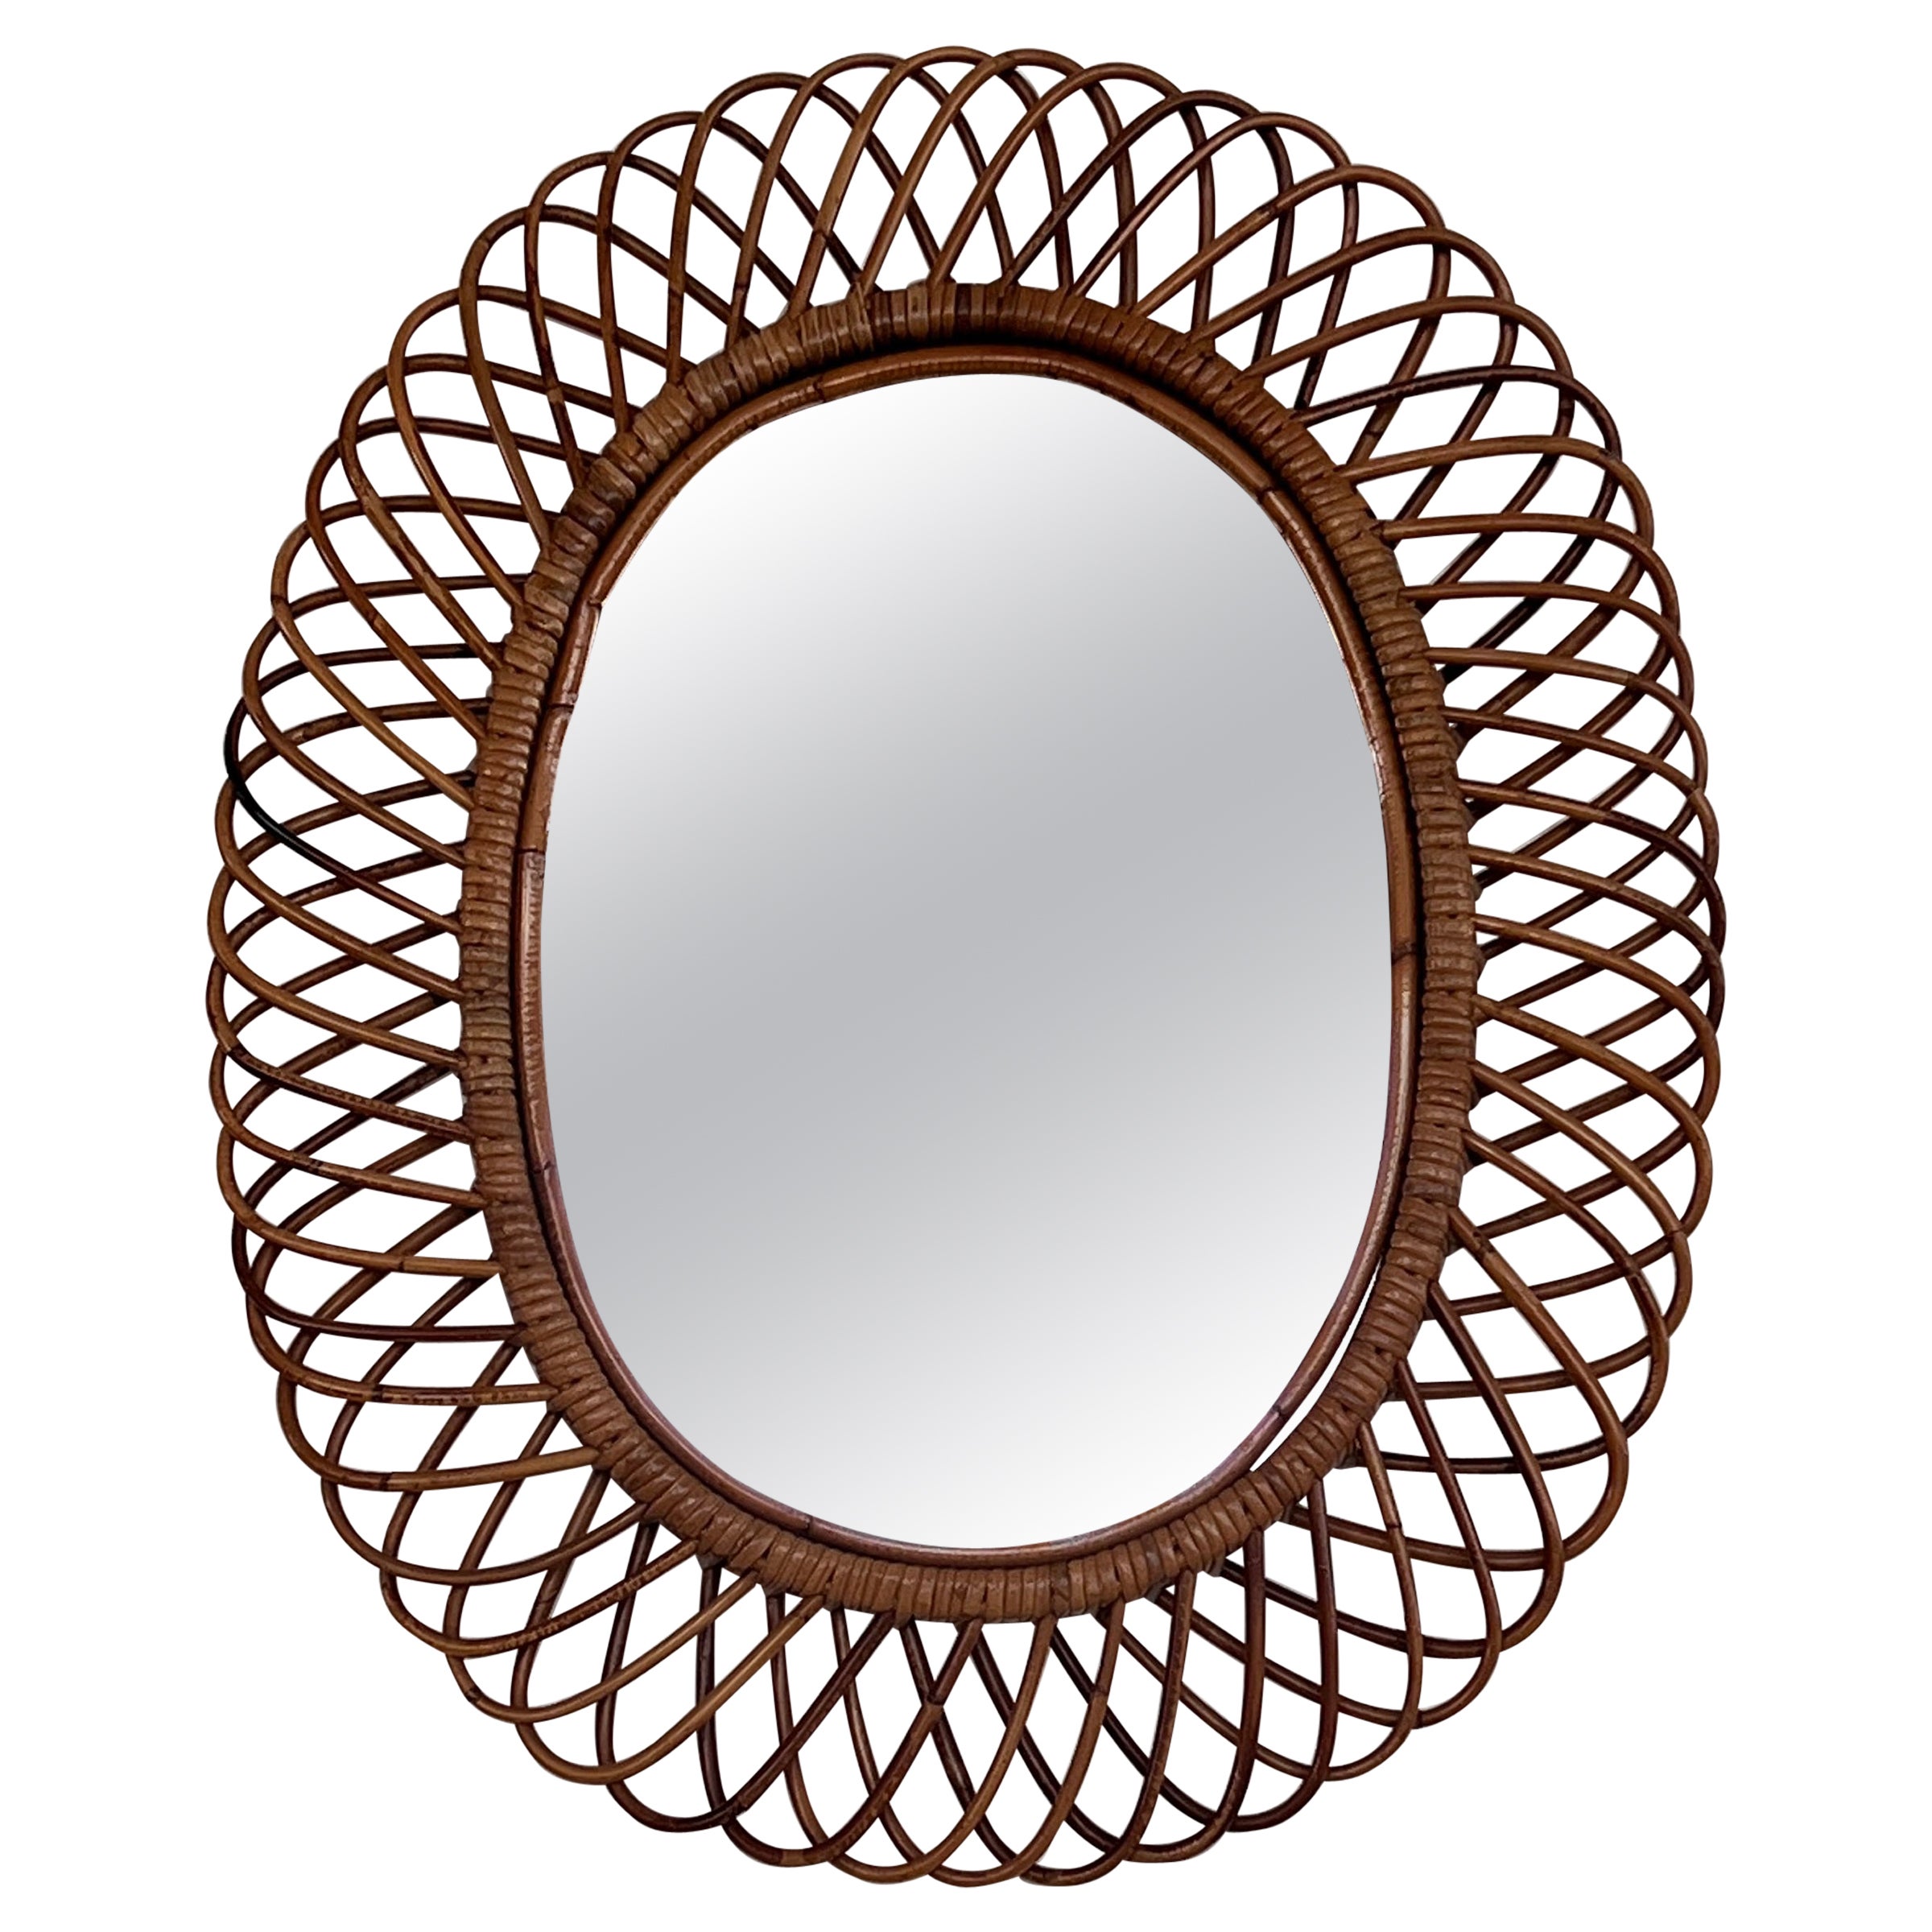 Italian Midcentury Oval Wall Mirror With Bamboo Frame Franco Albini Style, 1960s For Sale